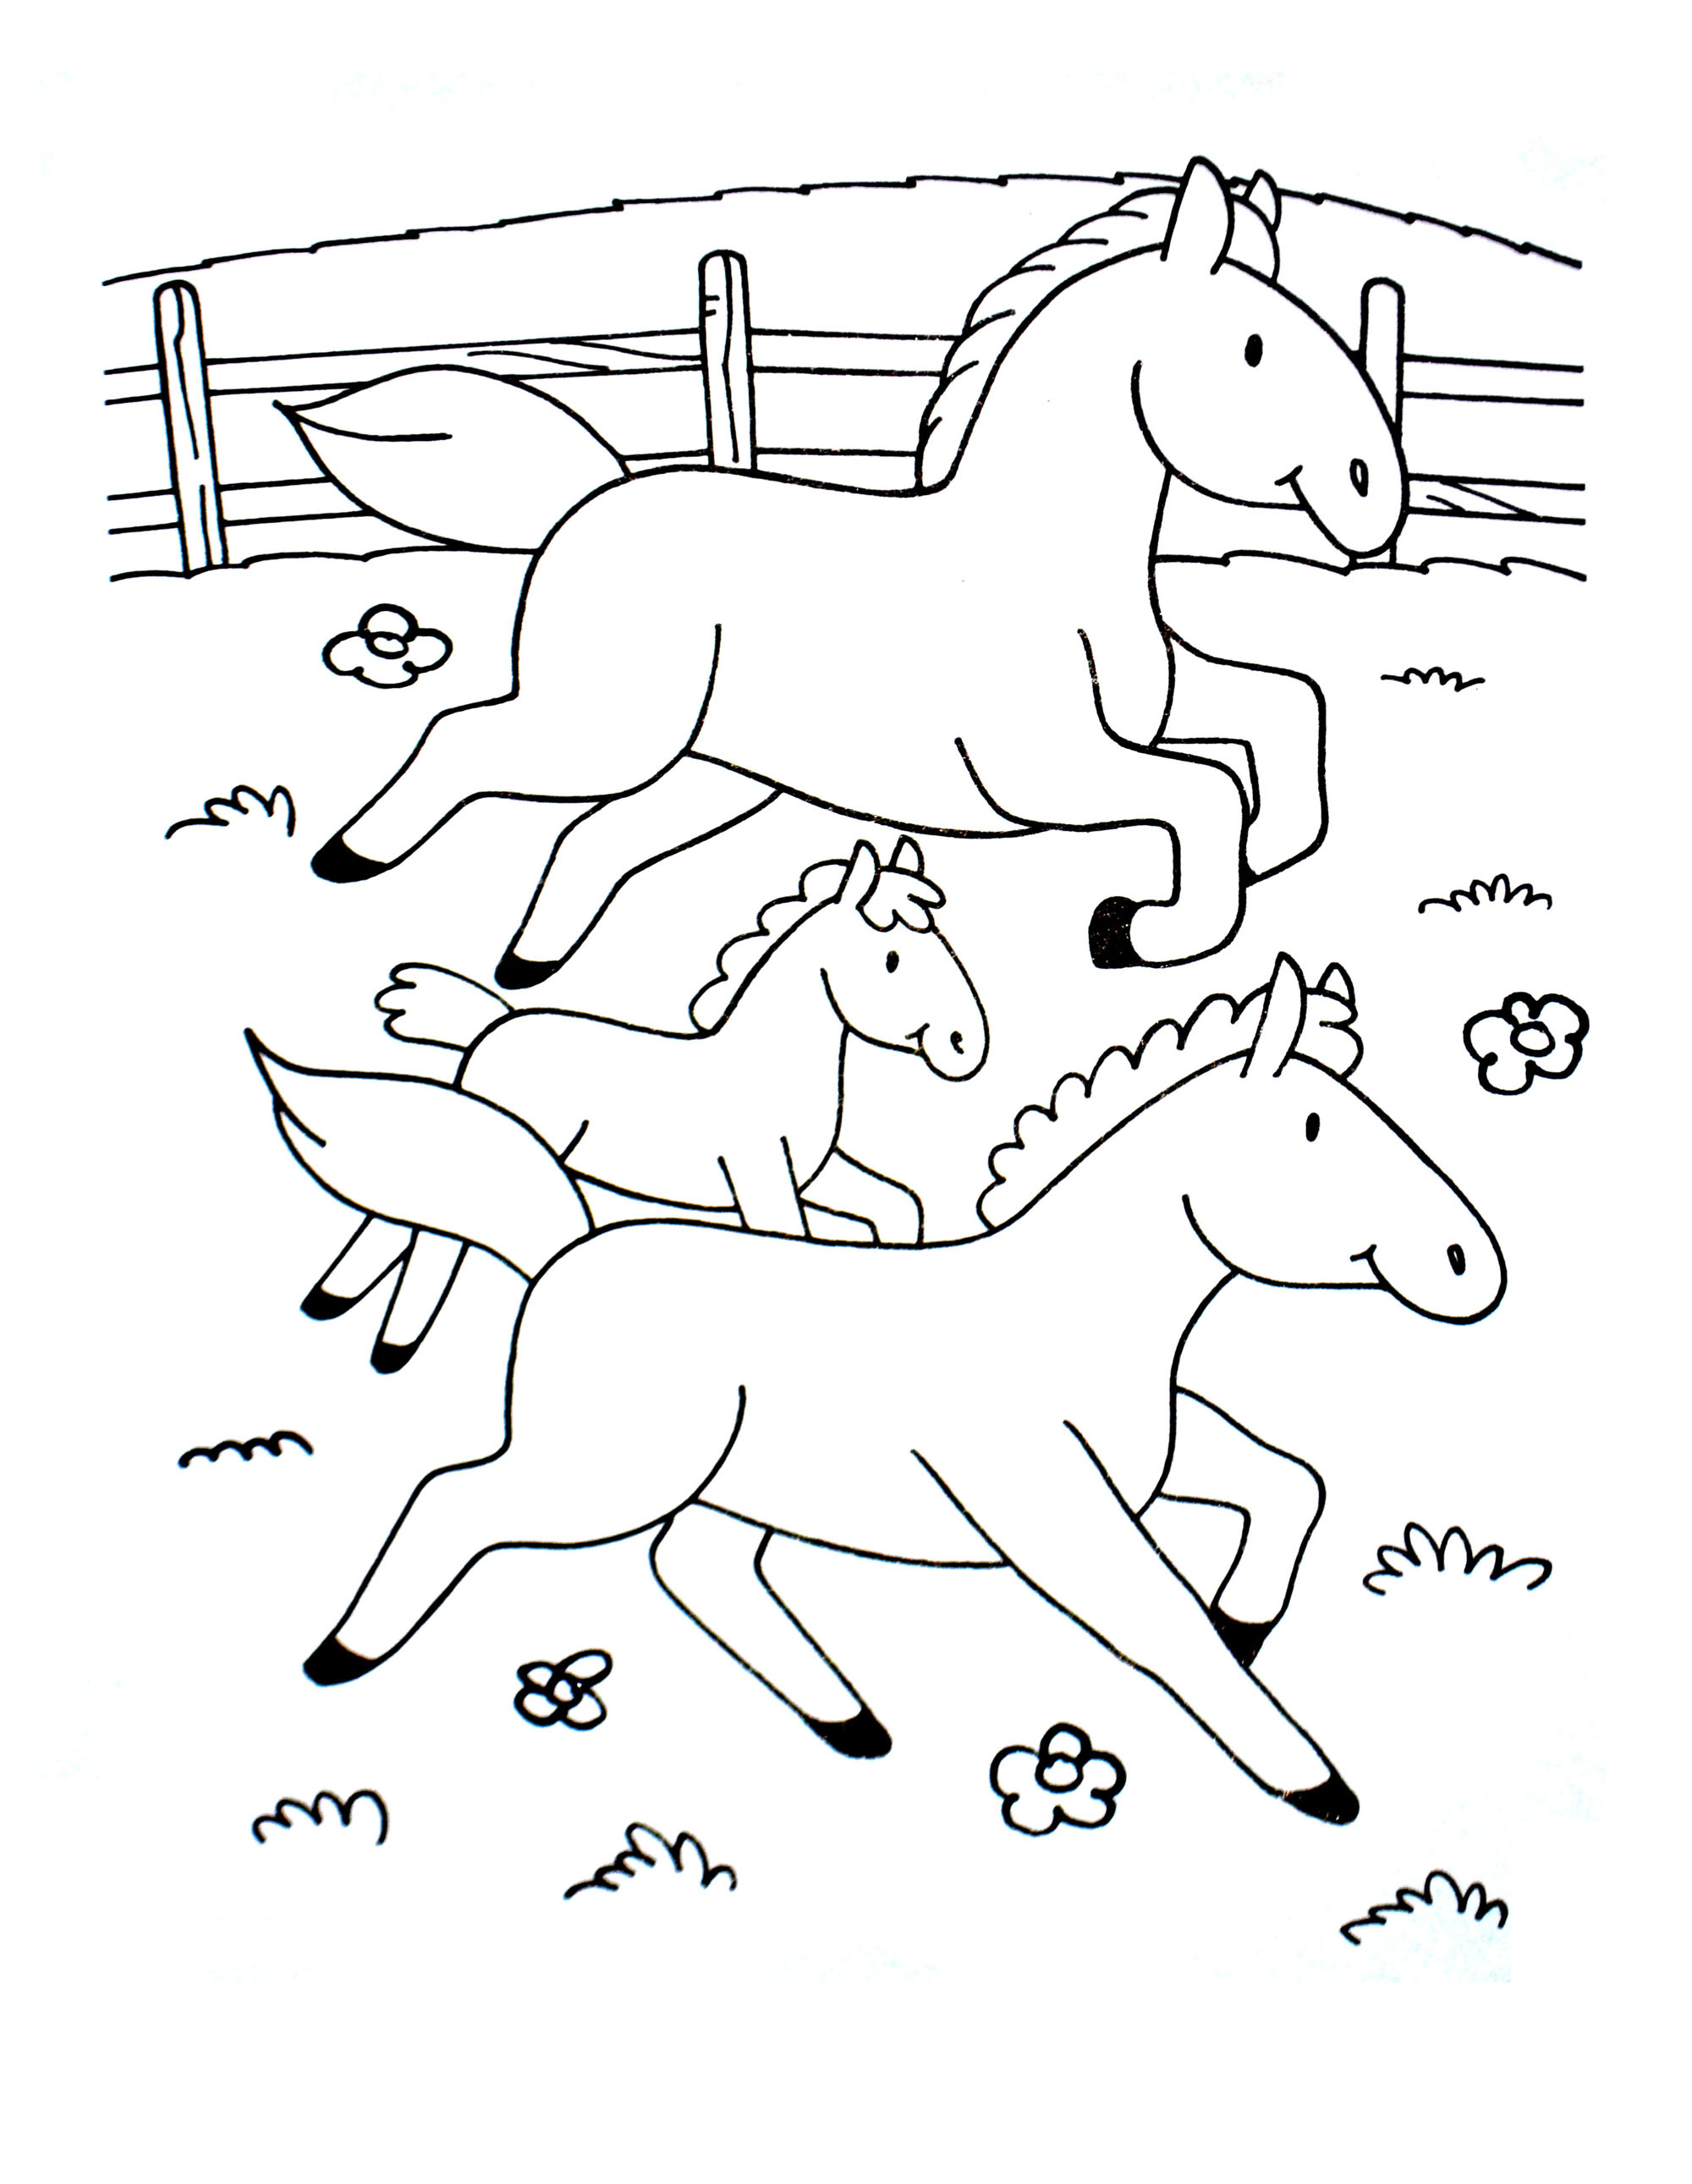 Horse to color for kids : Simple drawing - Horses Kids Coloring Pages